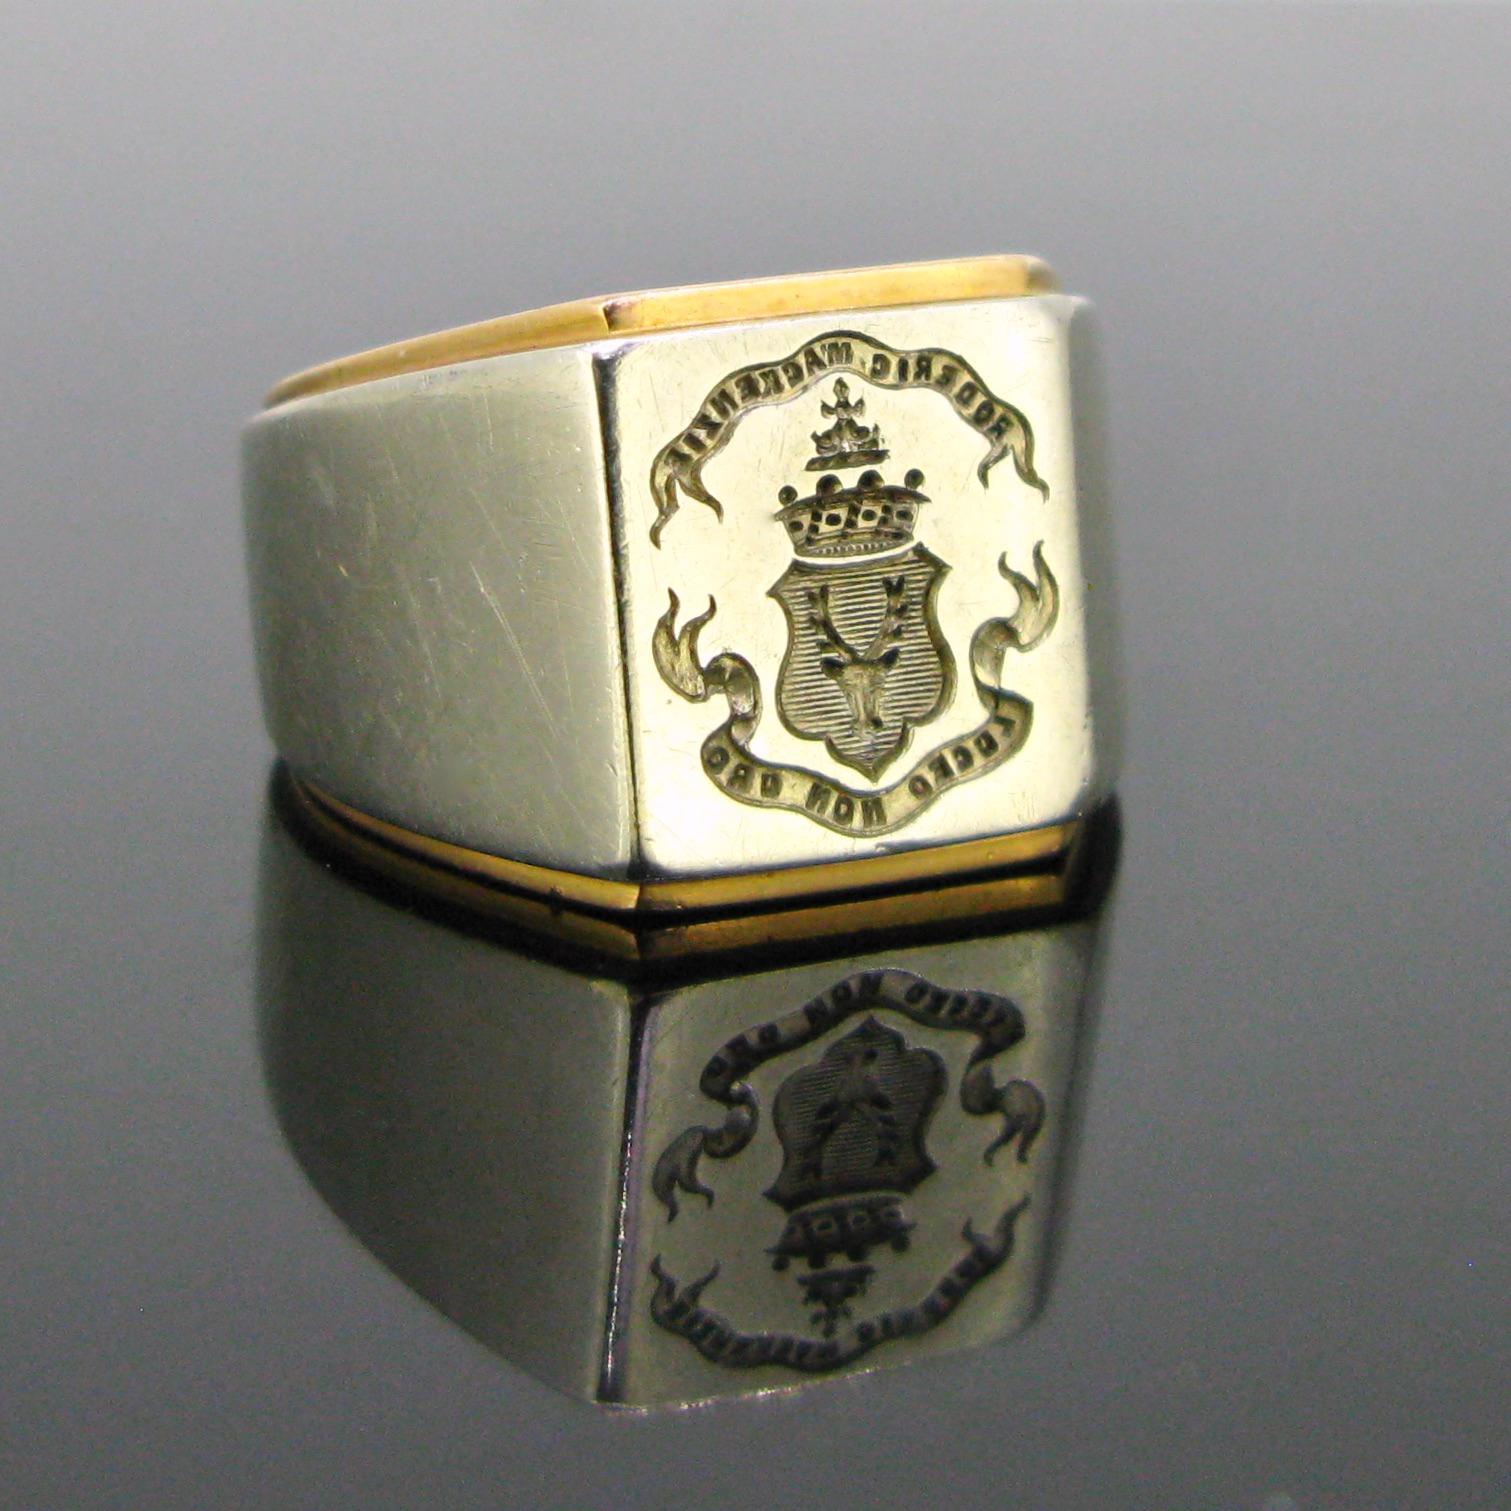 Weight: 18.75gr


Metal: 18kt Yellow and white gold


Condition: Very Good


Hallmarks: French, eagle’s head


Comments: This vintage family crest ring is in very good vintage condition. The crest is beautifully detailed and engraved with the